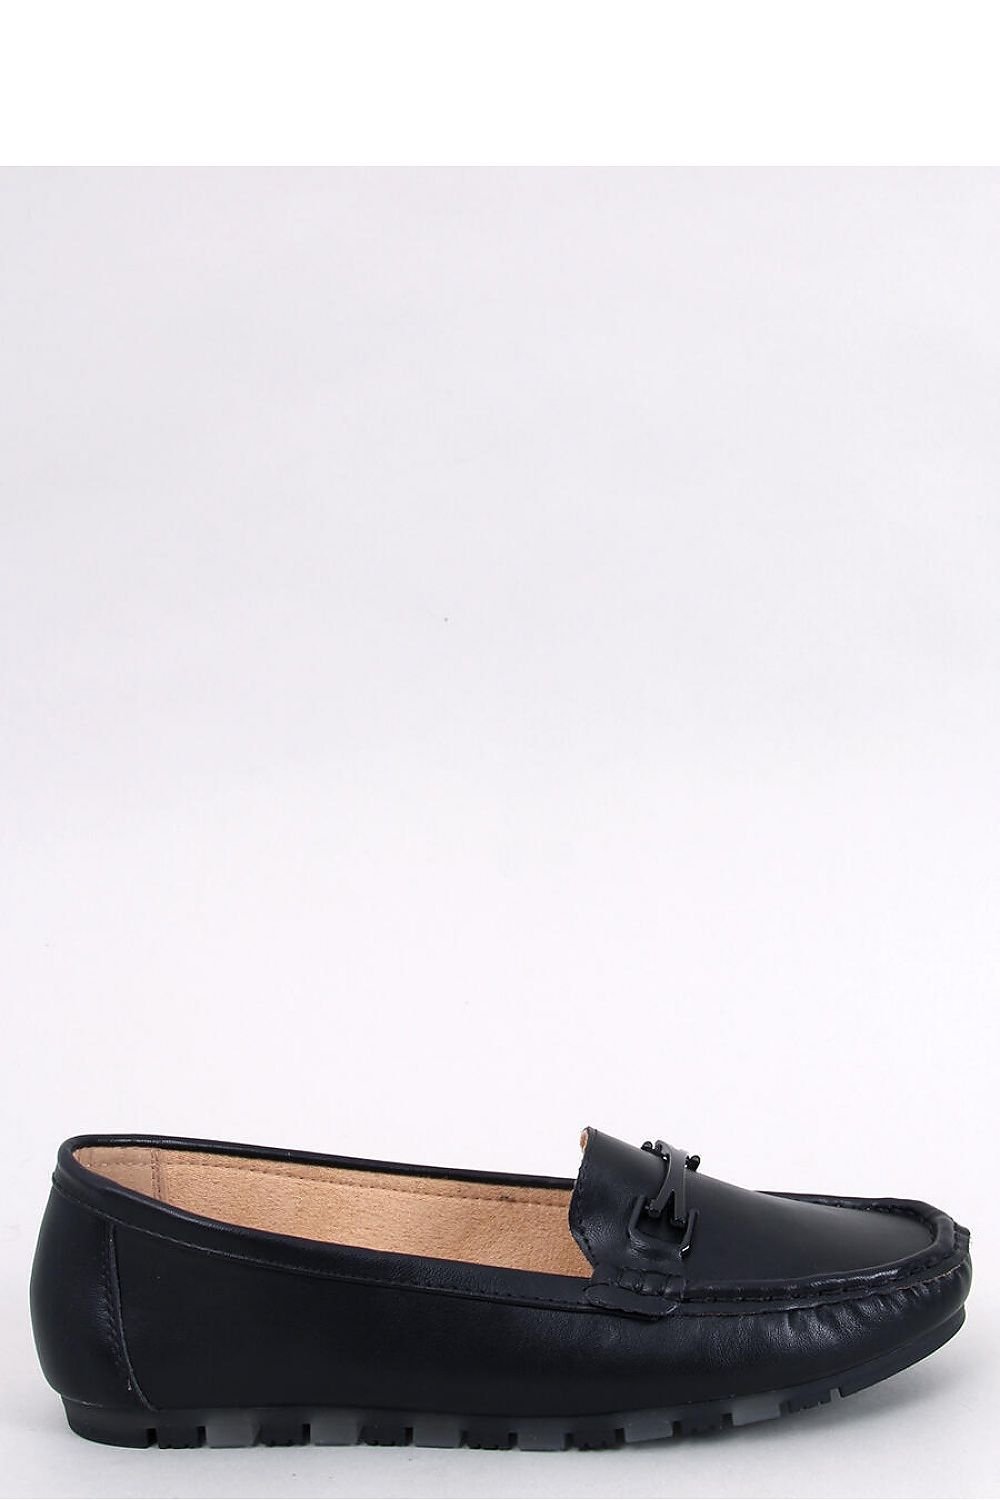 Eco-Leather Business Moccasins - Black